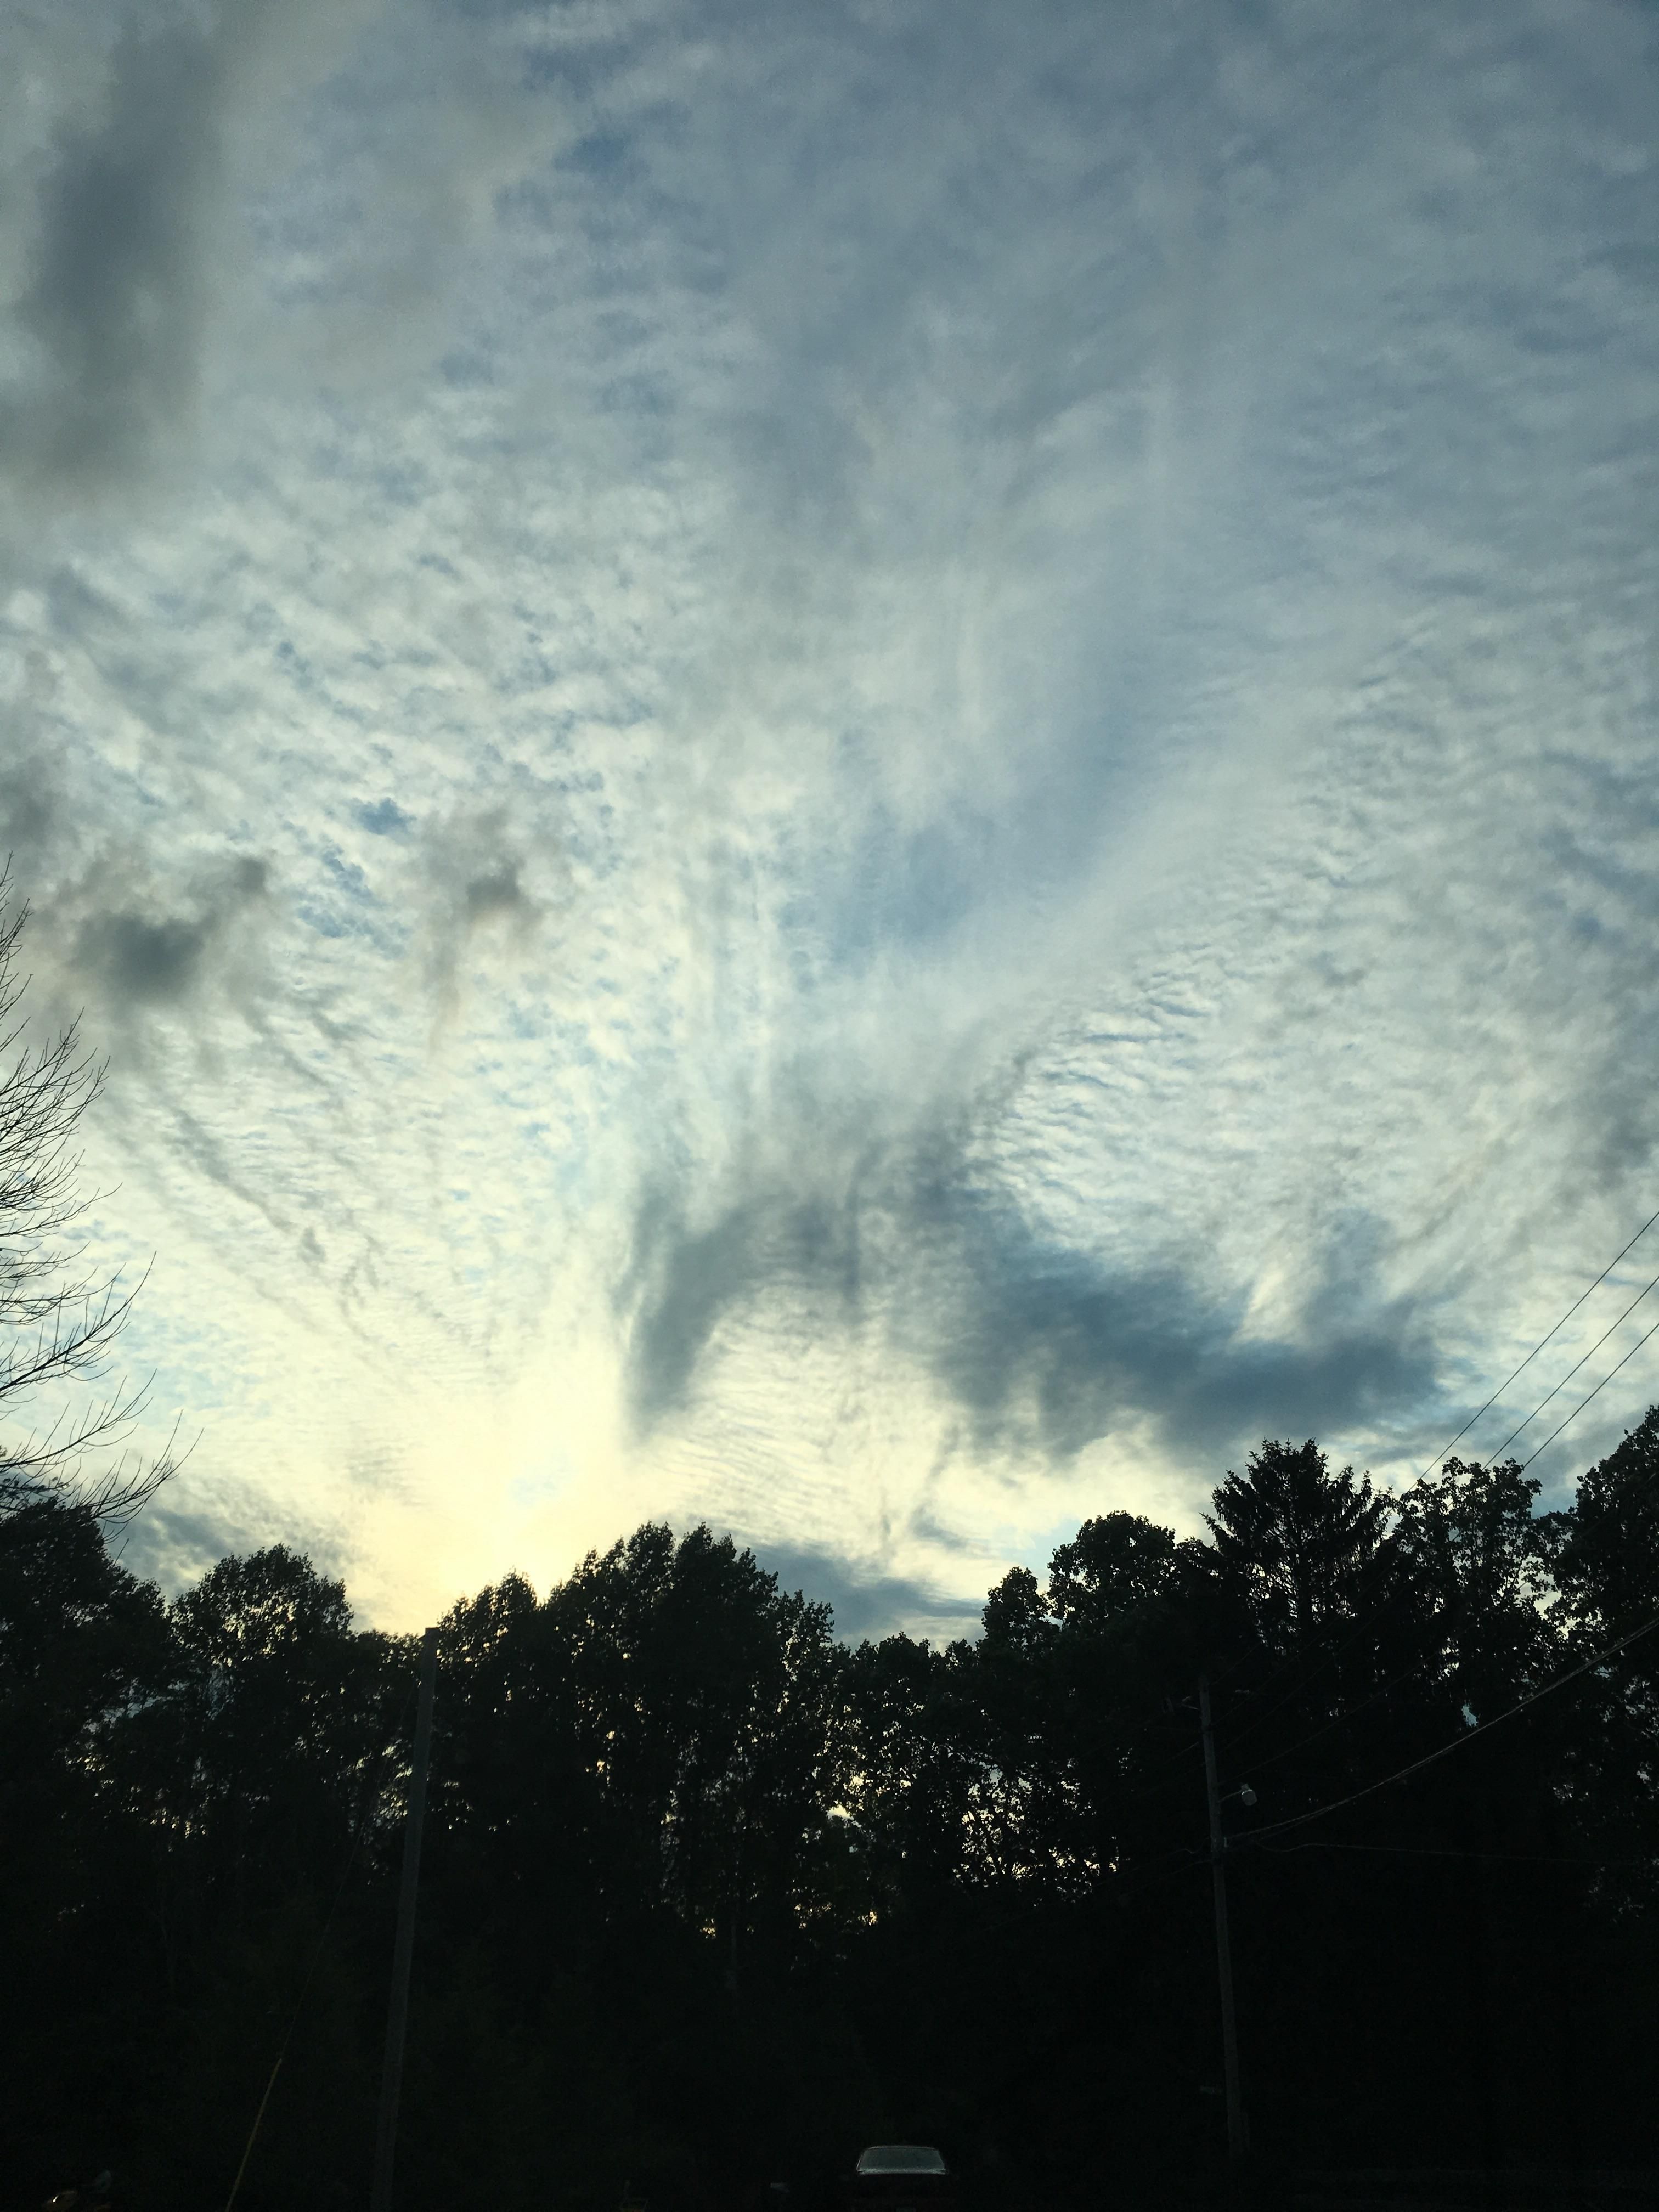 Swirly rippled clouds I saw while driving | Pics | Pinterest